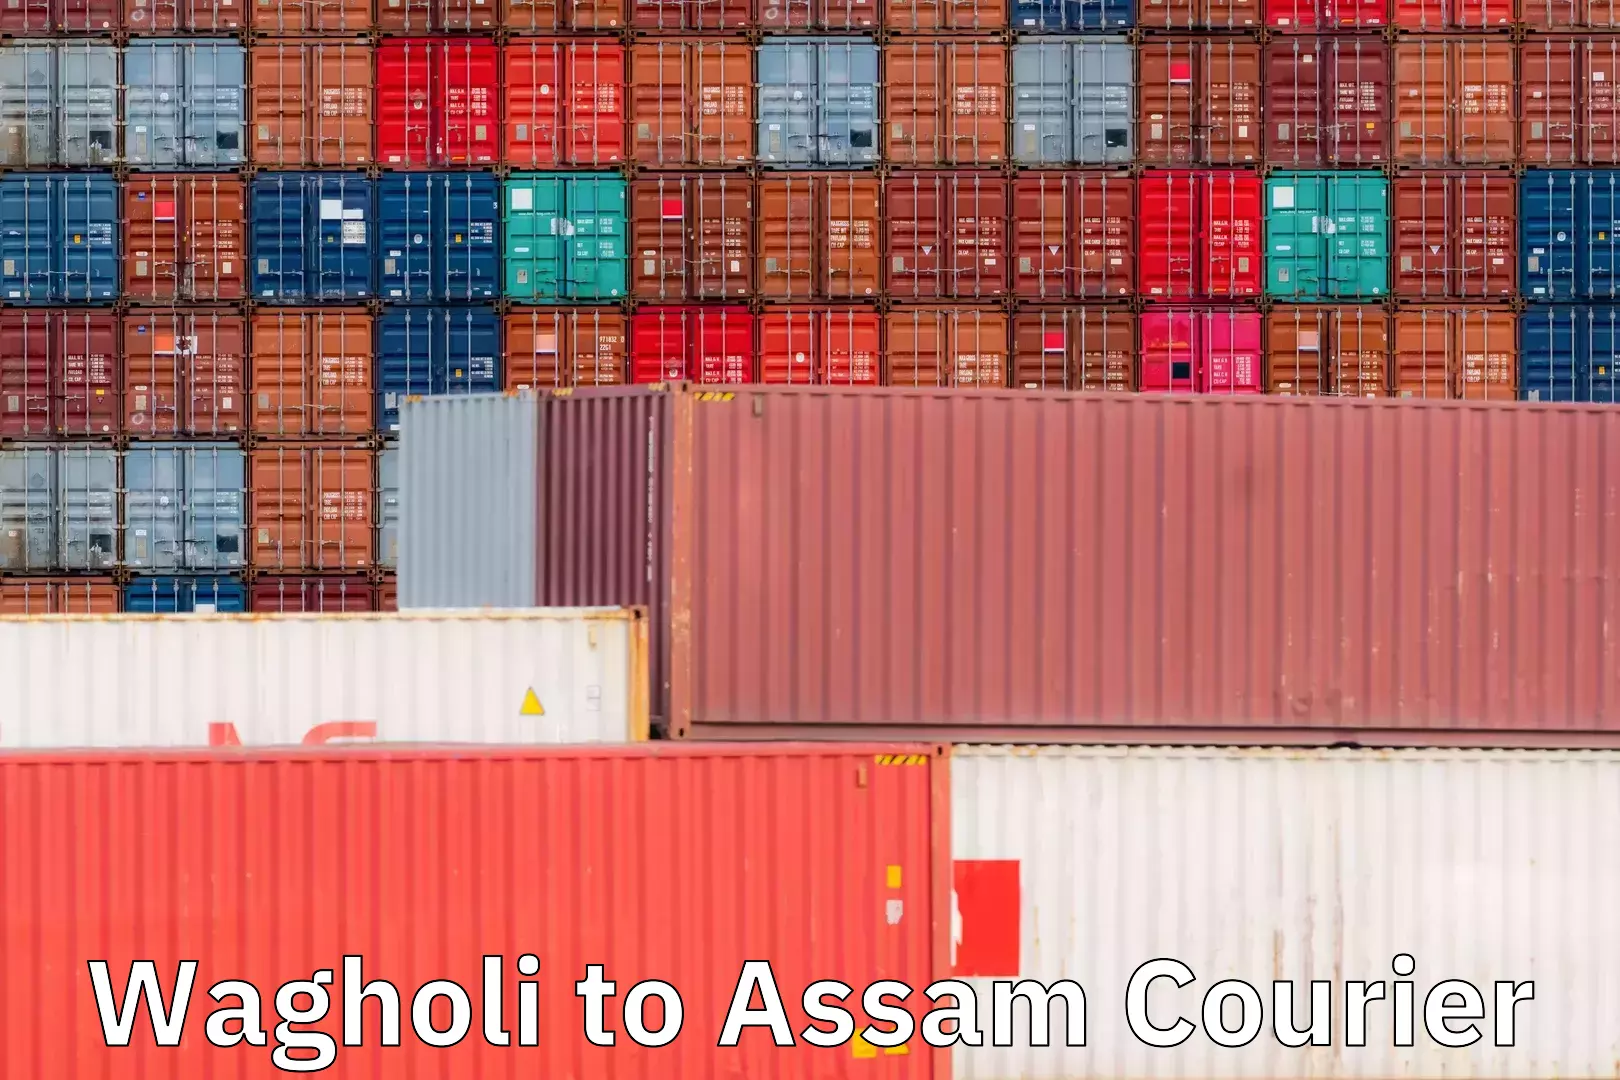 Global shipping networks Wagholi to Assam